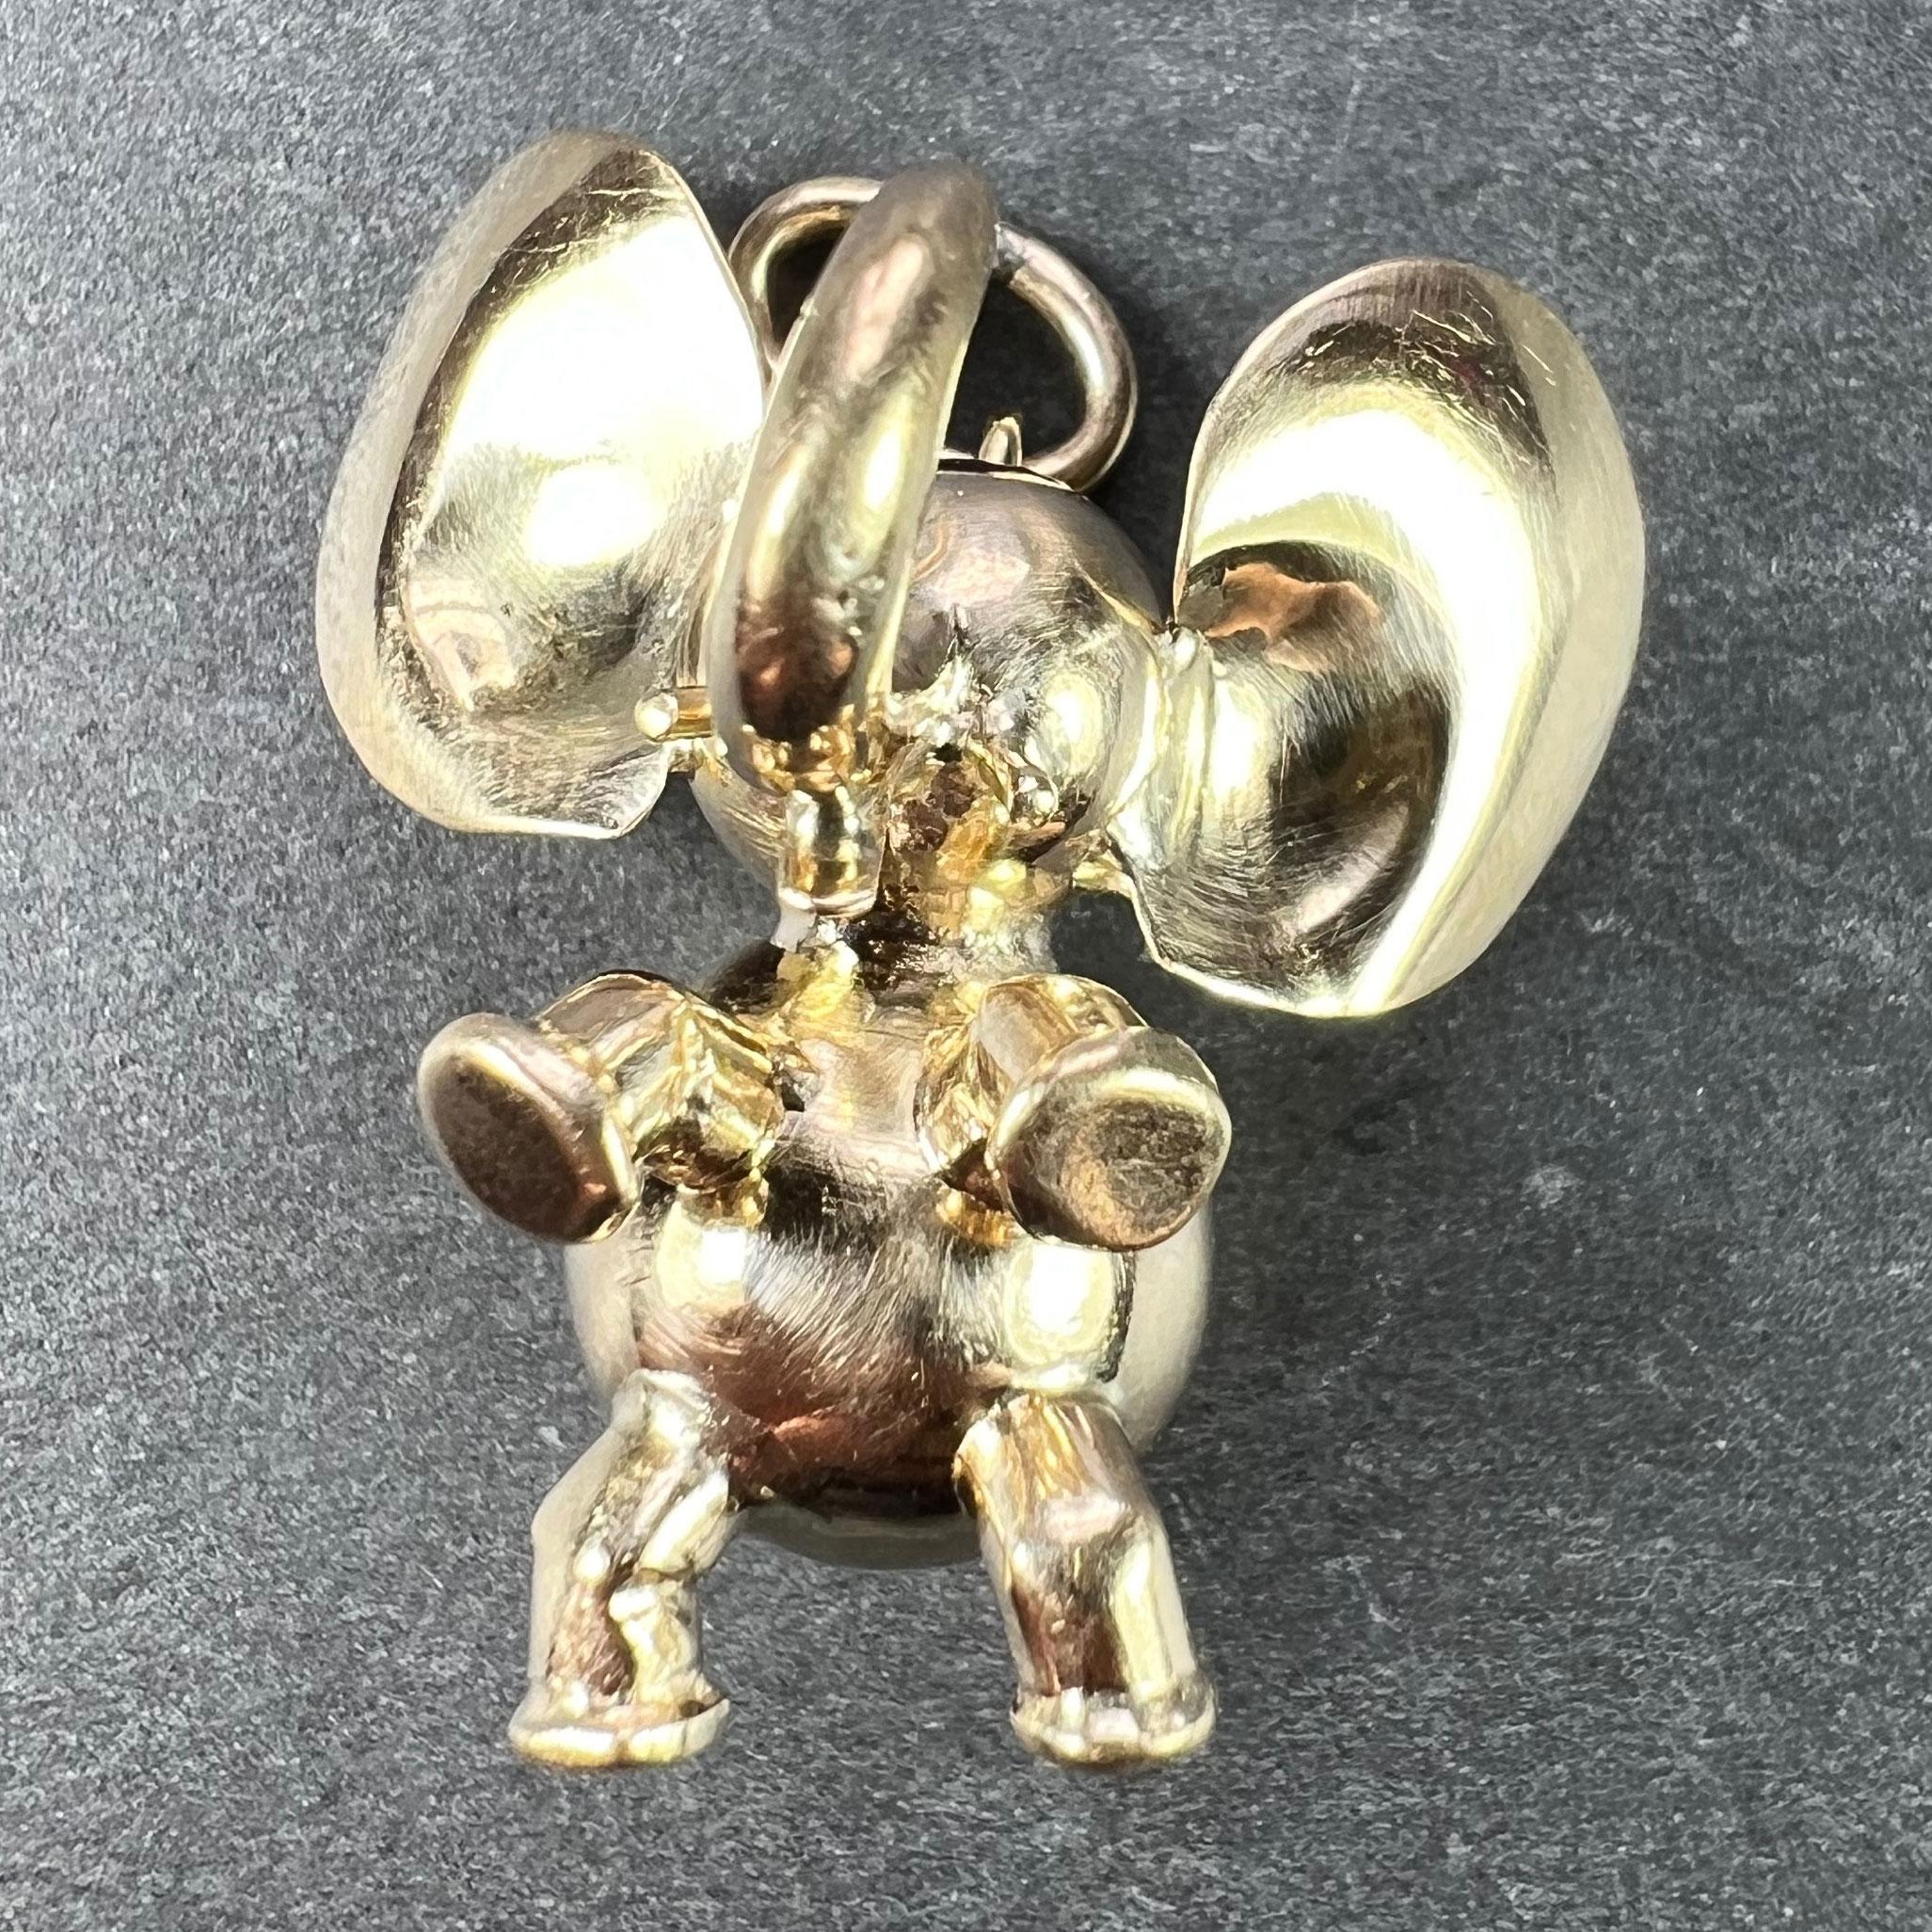 A large 14 karat (14K) yellow gold charm pendant designed as a lucky elephant with large ears. Stamped 585 for 14 karat gold.

Dimensions: 2.5 x 2.3 x 2 cm (not including jump ring)
Weight: 4.57 grams
(Chain not included)